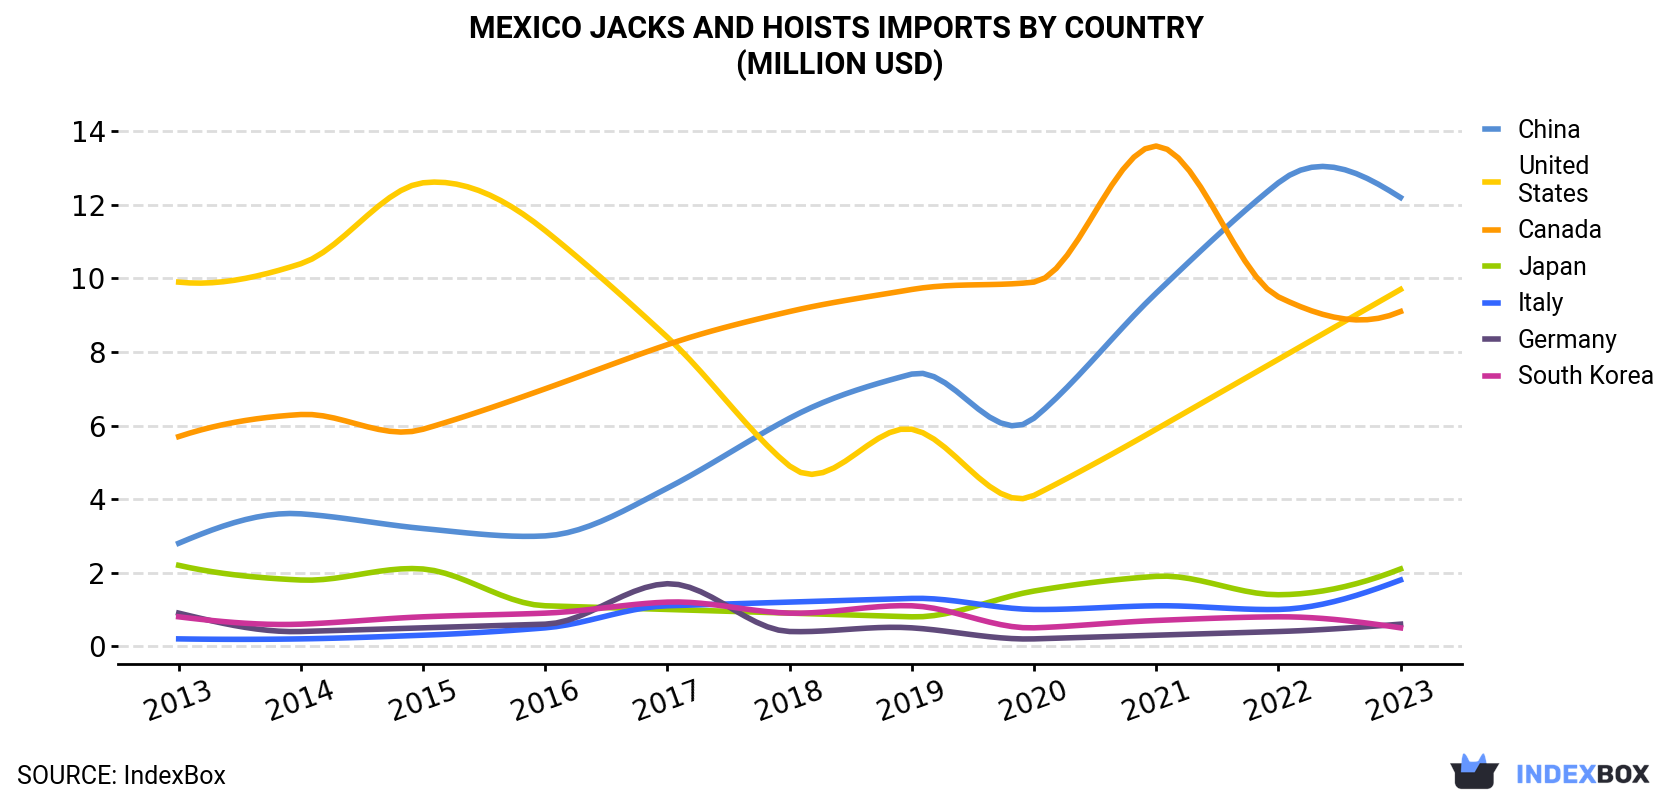 Mexico Jacks And Hoists Imports By Country (Million USD)